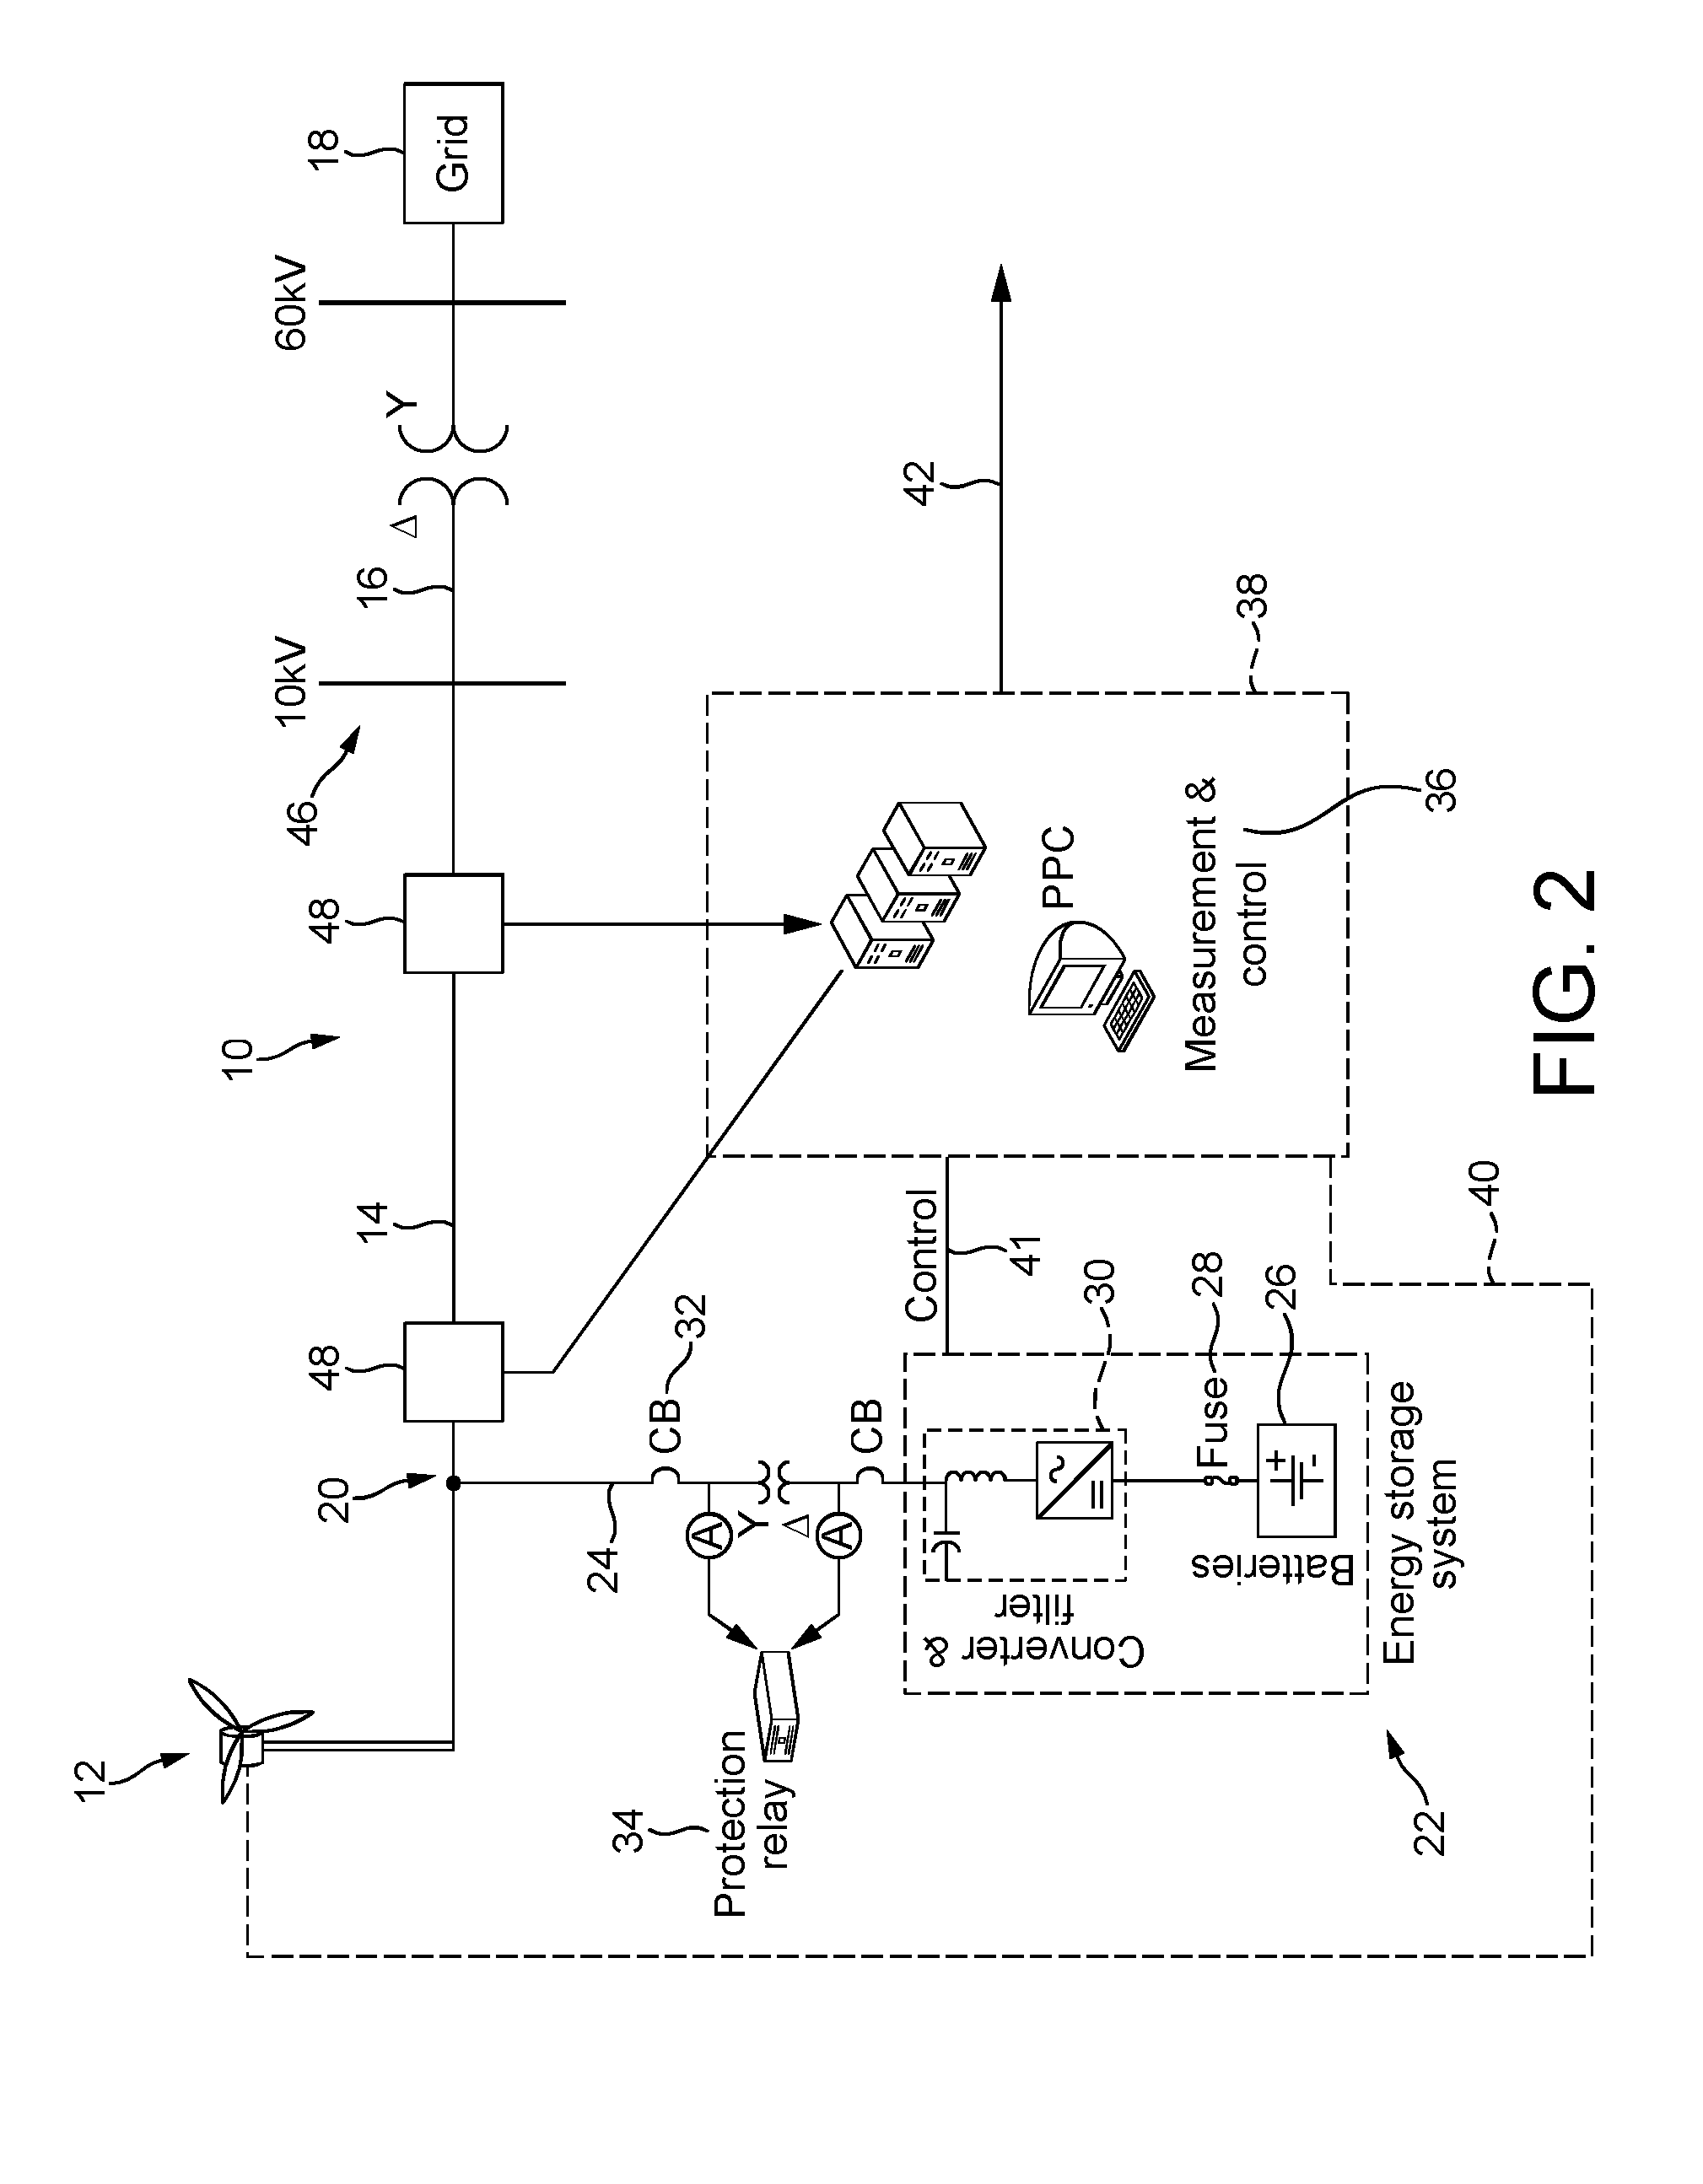 Selective droop response control for a wind turbine power plant